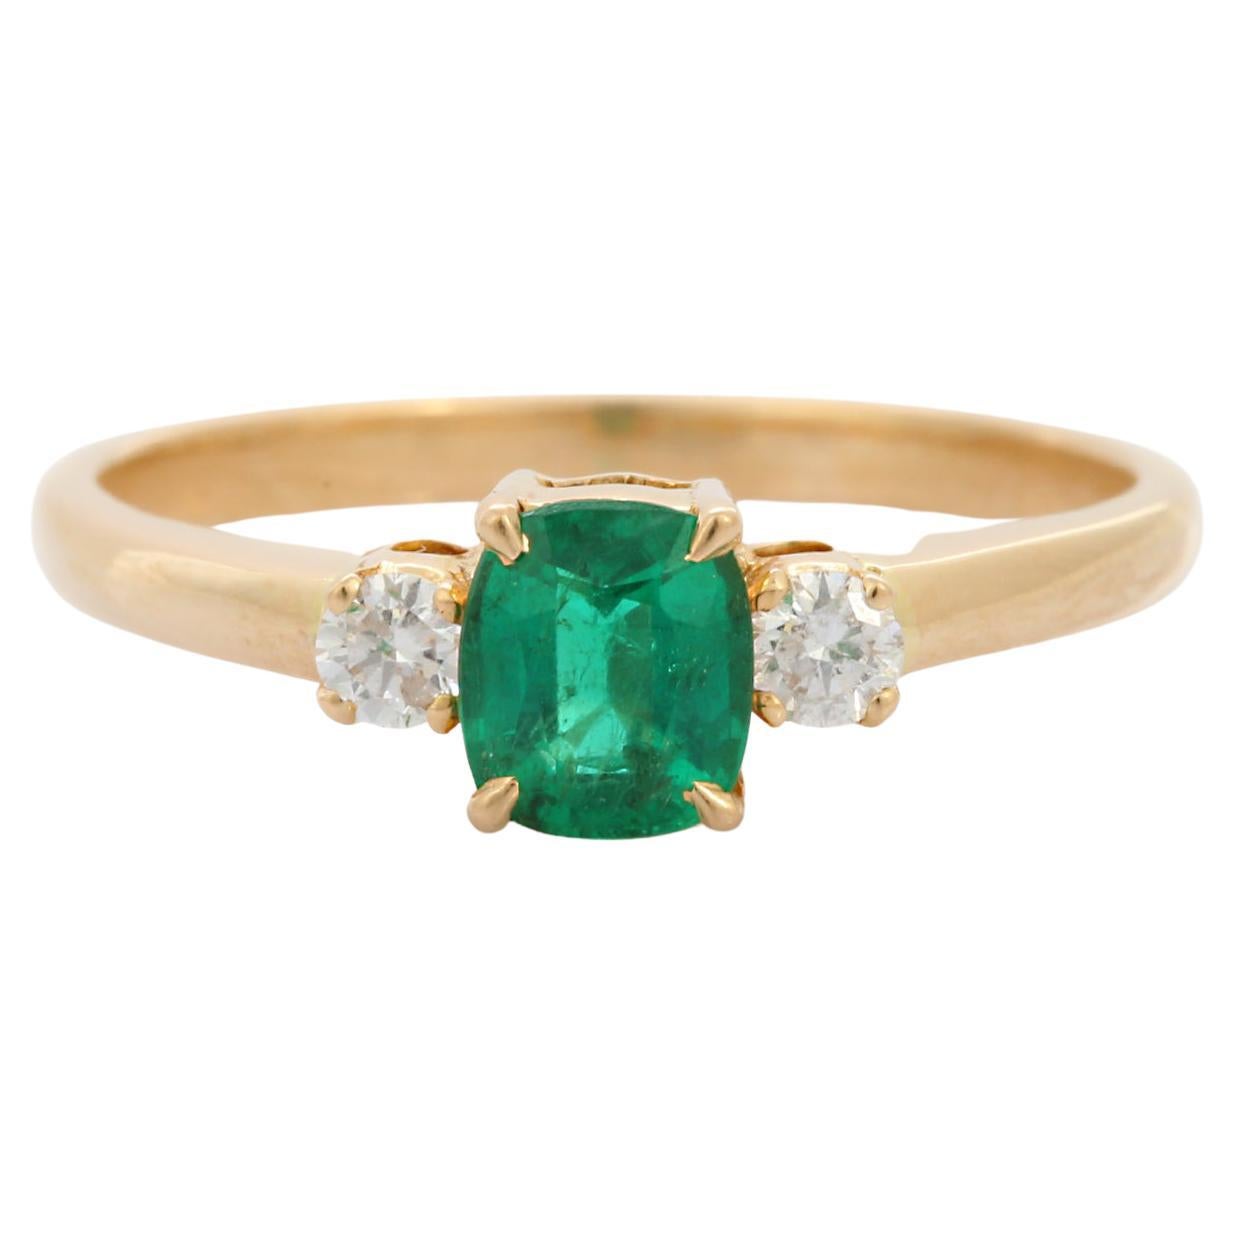 Emerald Gemstone Ring in 18k Solid Yellow Gold with Diamonds